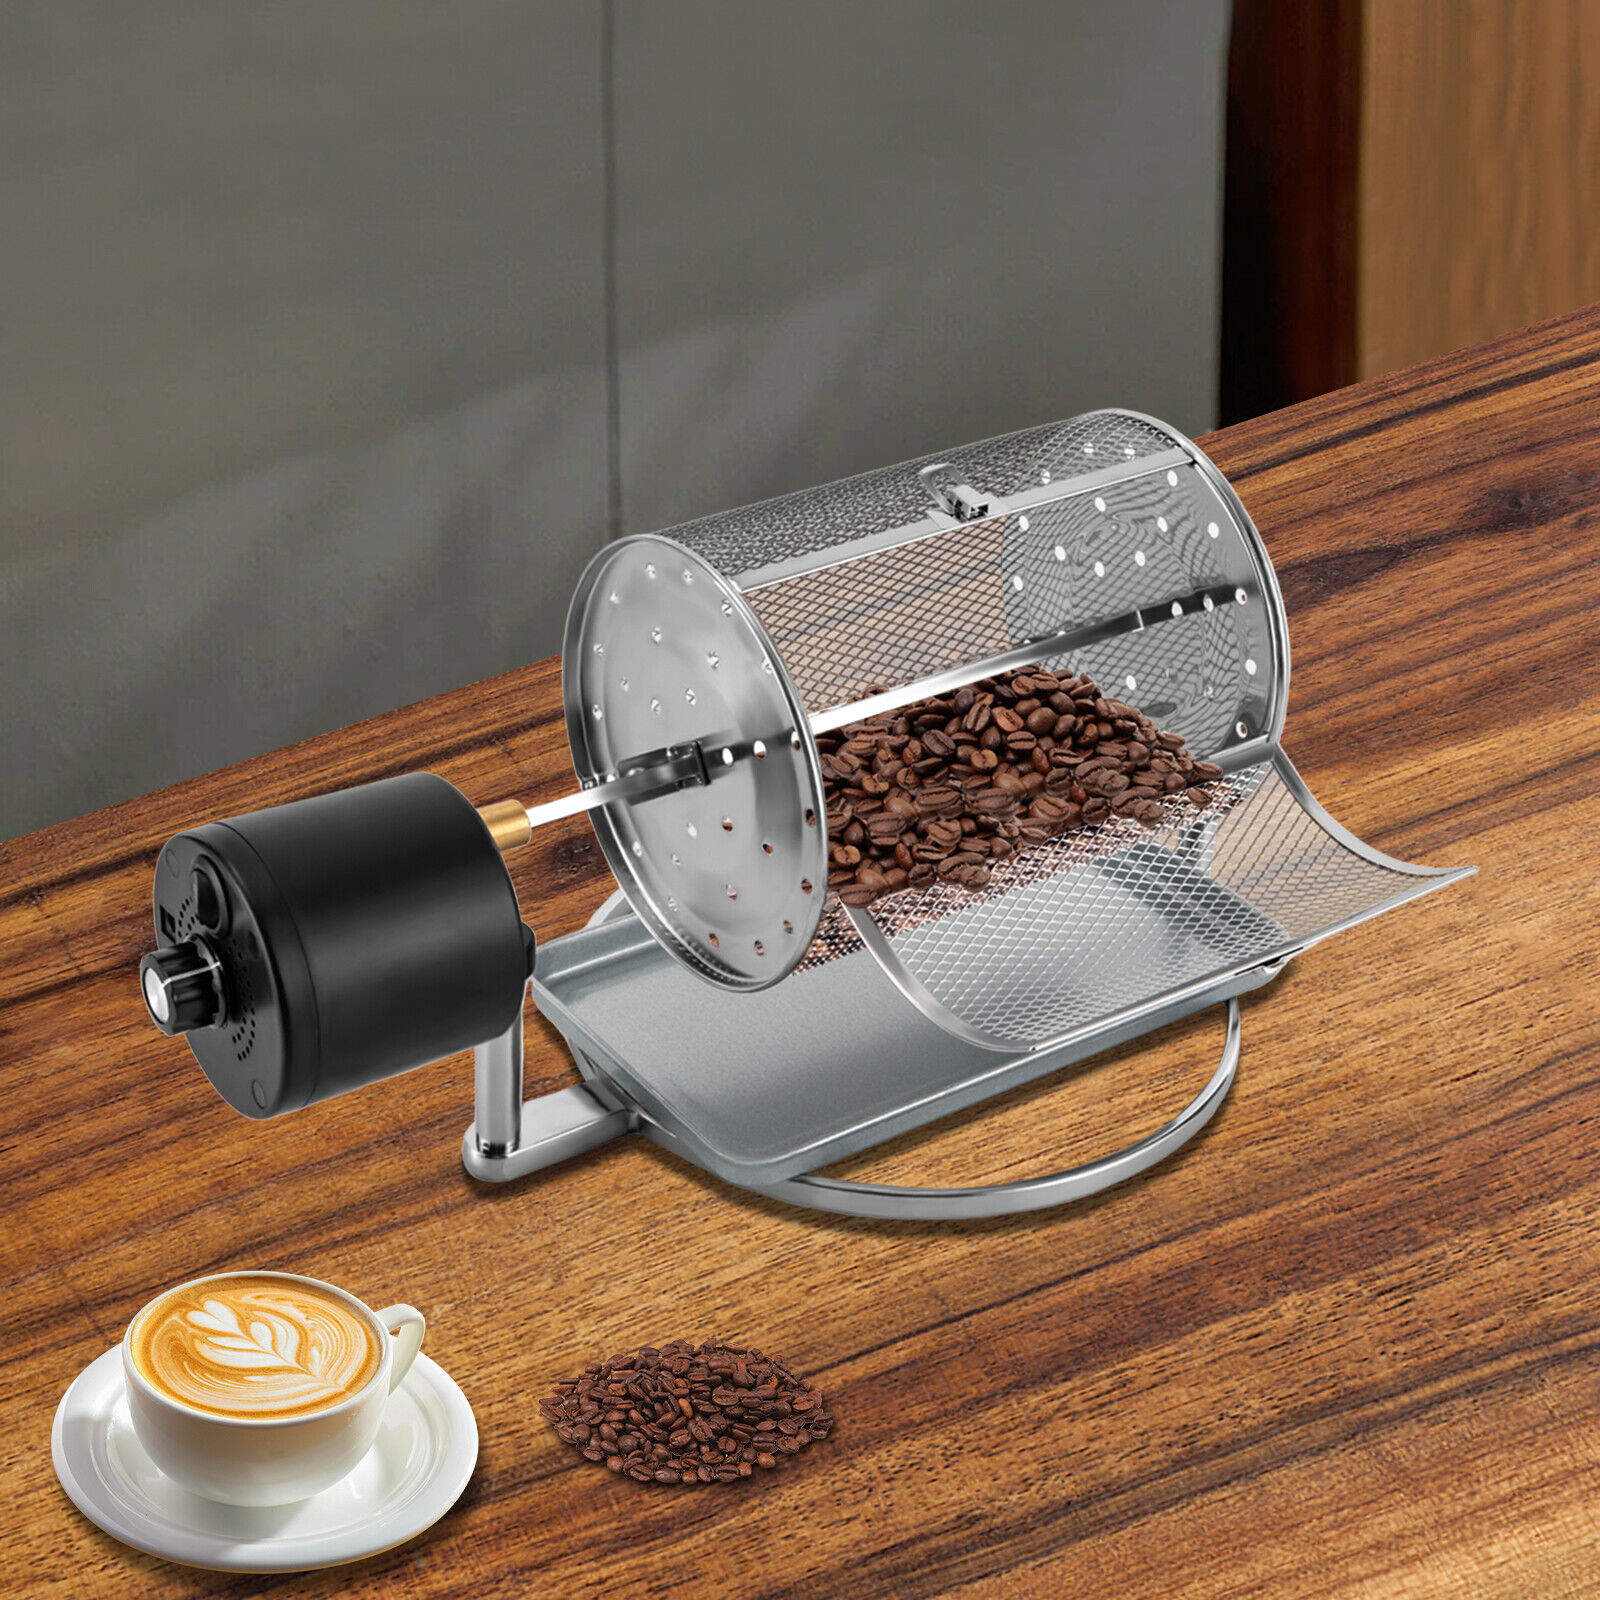 14W Electric Coffee Roaster Machine Coffee Bean Roaster Machine for Home Use Unbranded Does not apply - фотография #22